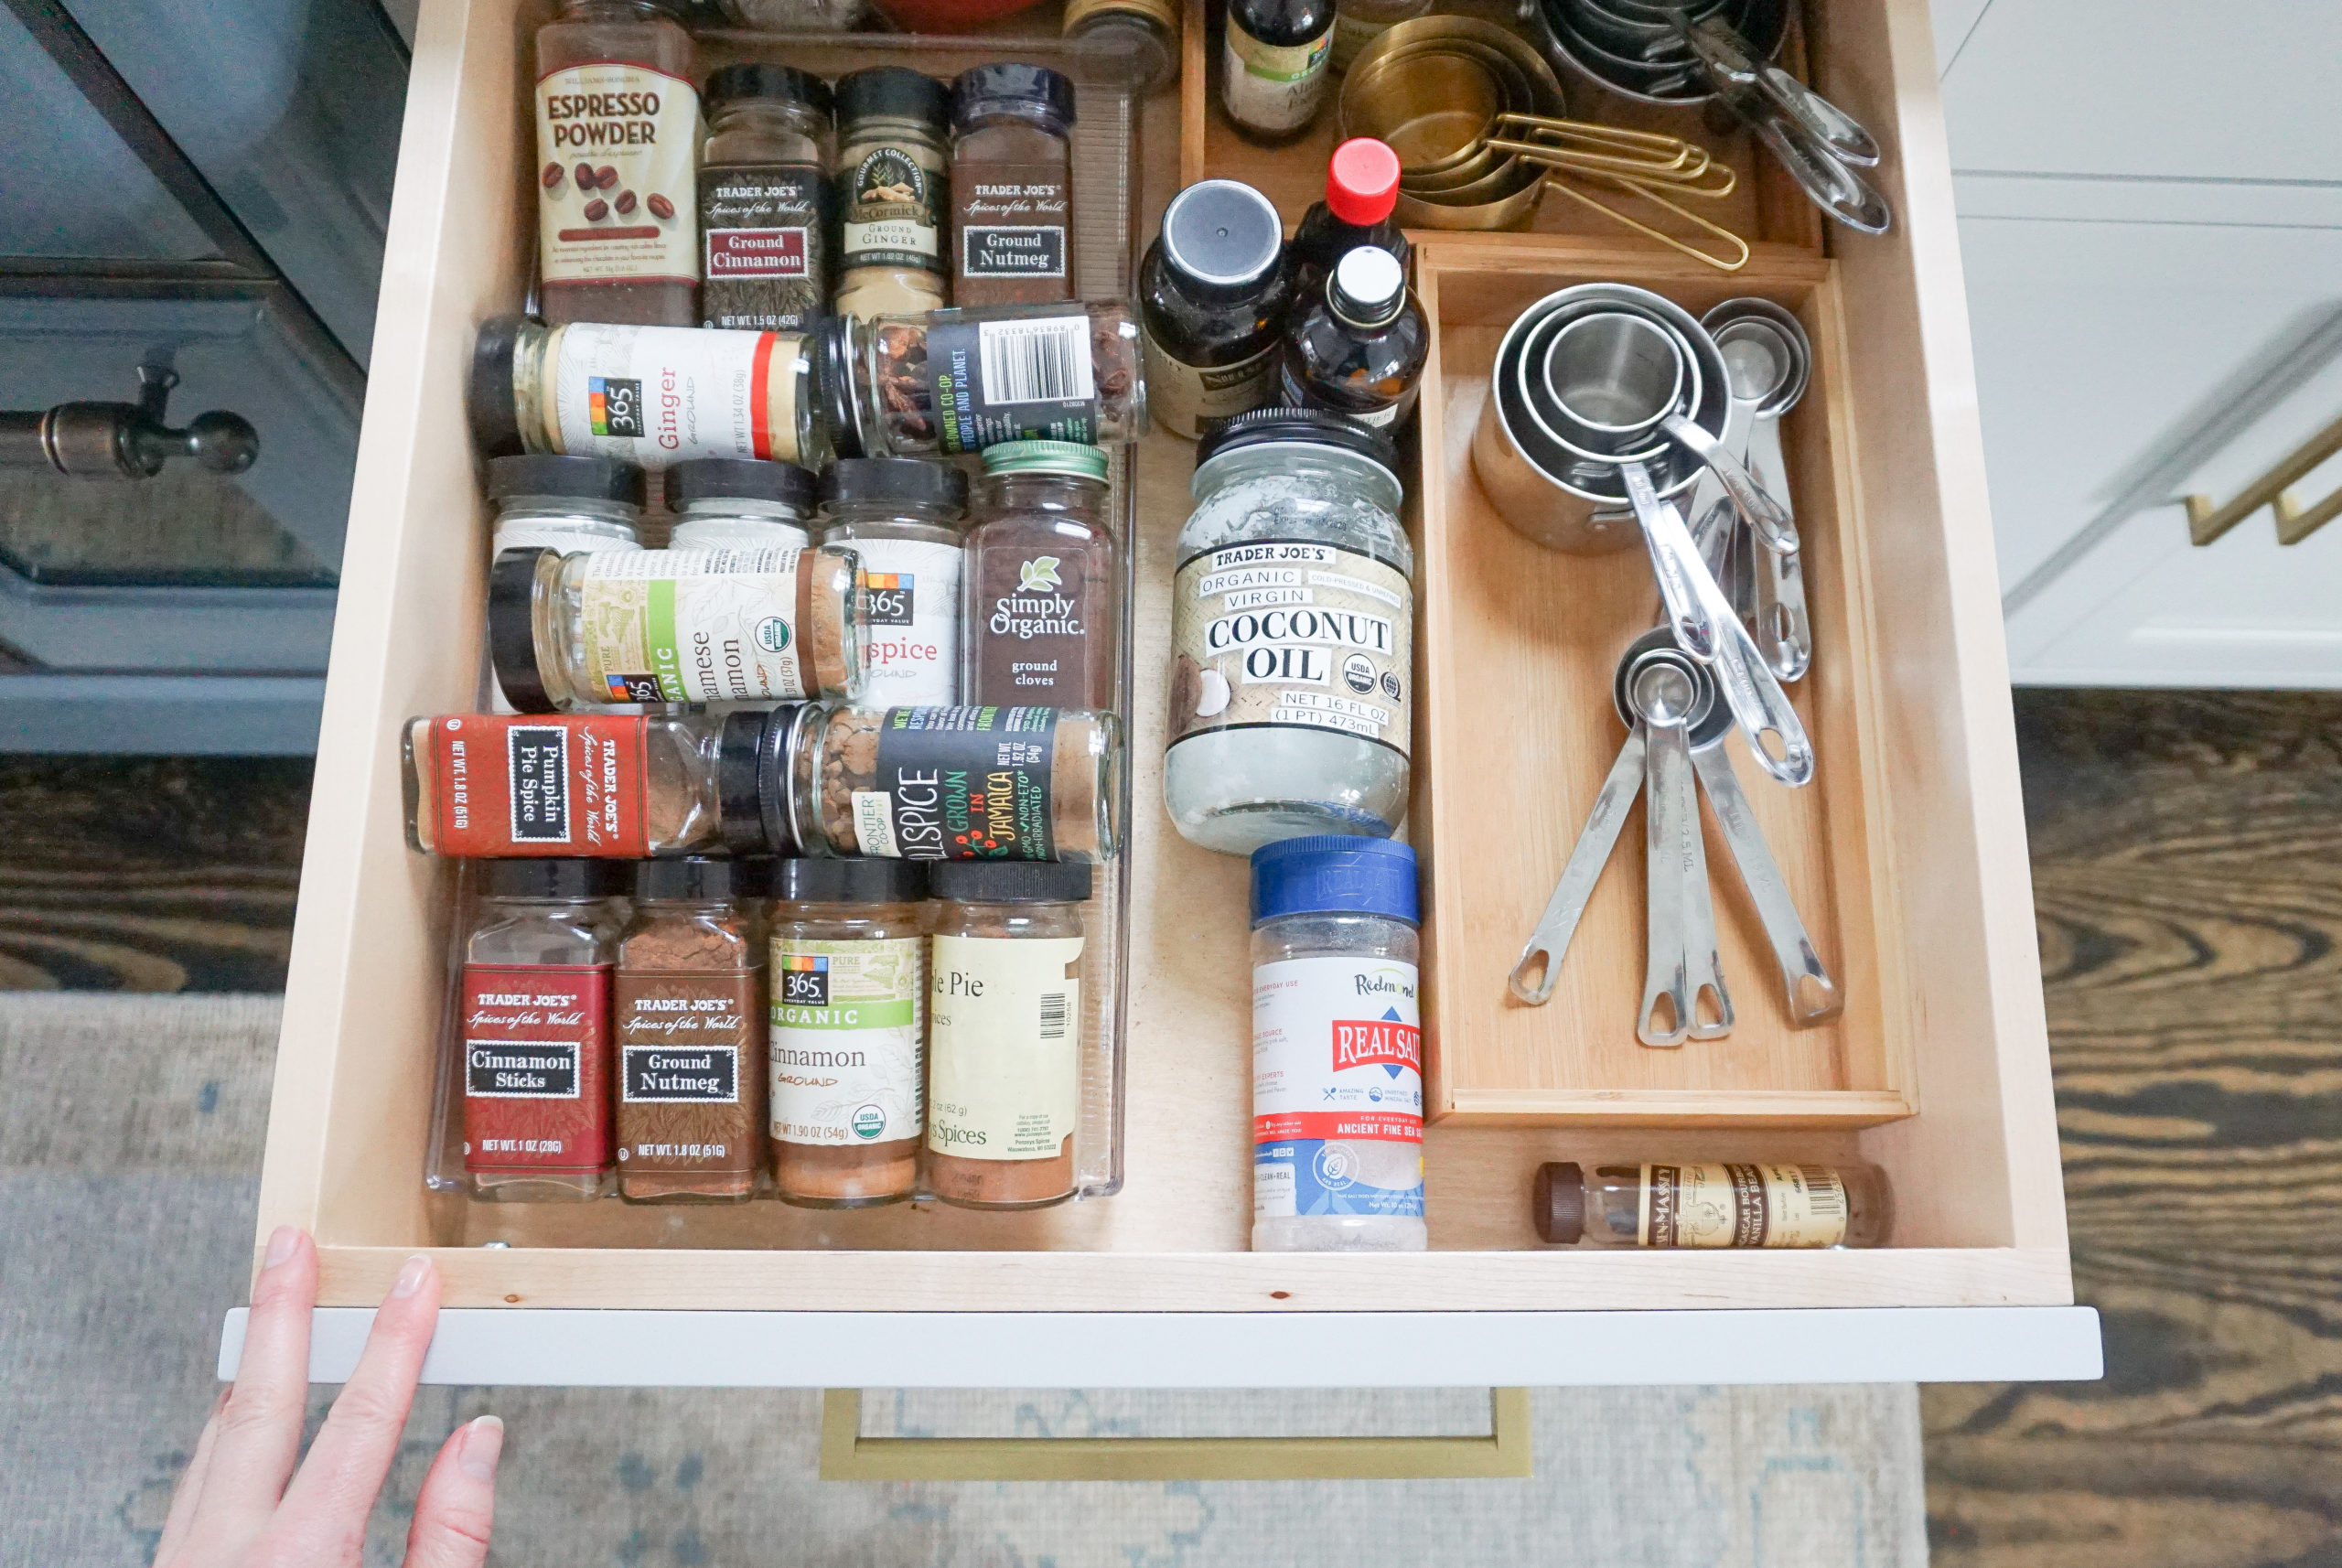 Spice Drawer Organization In the Kitchen - Finding Lovely